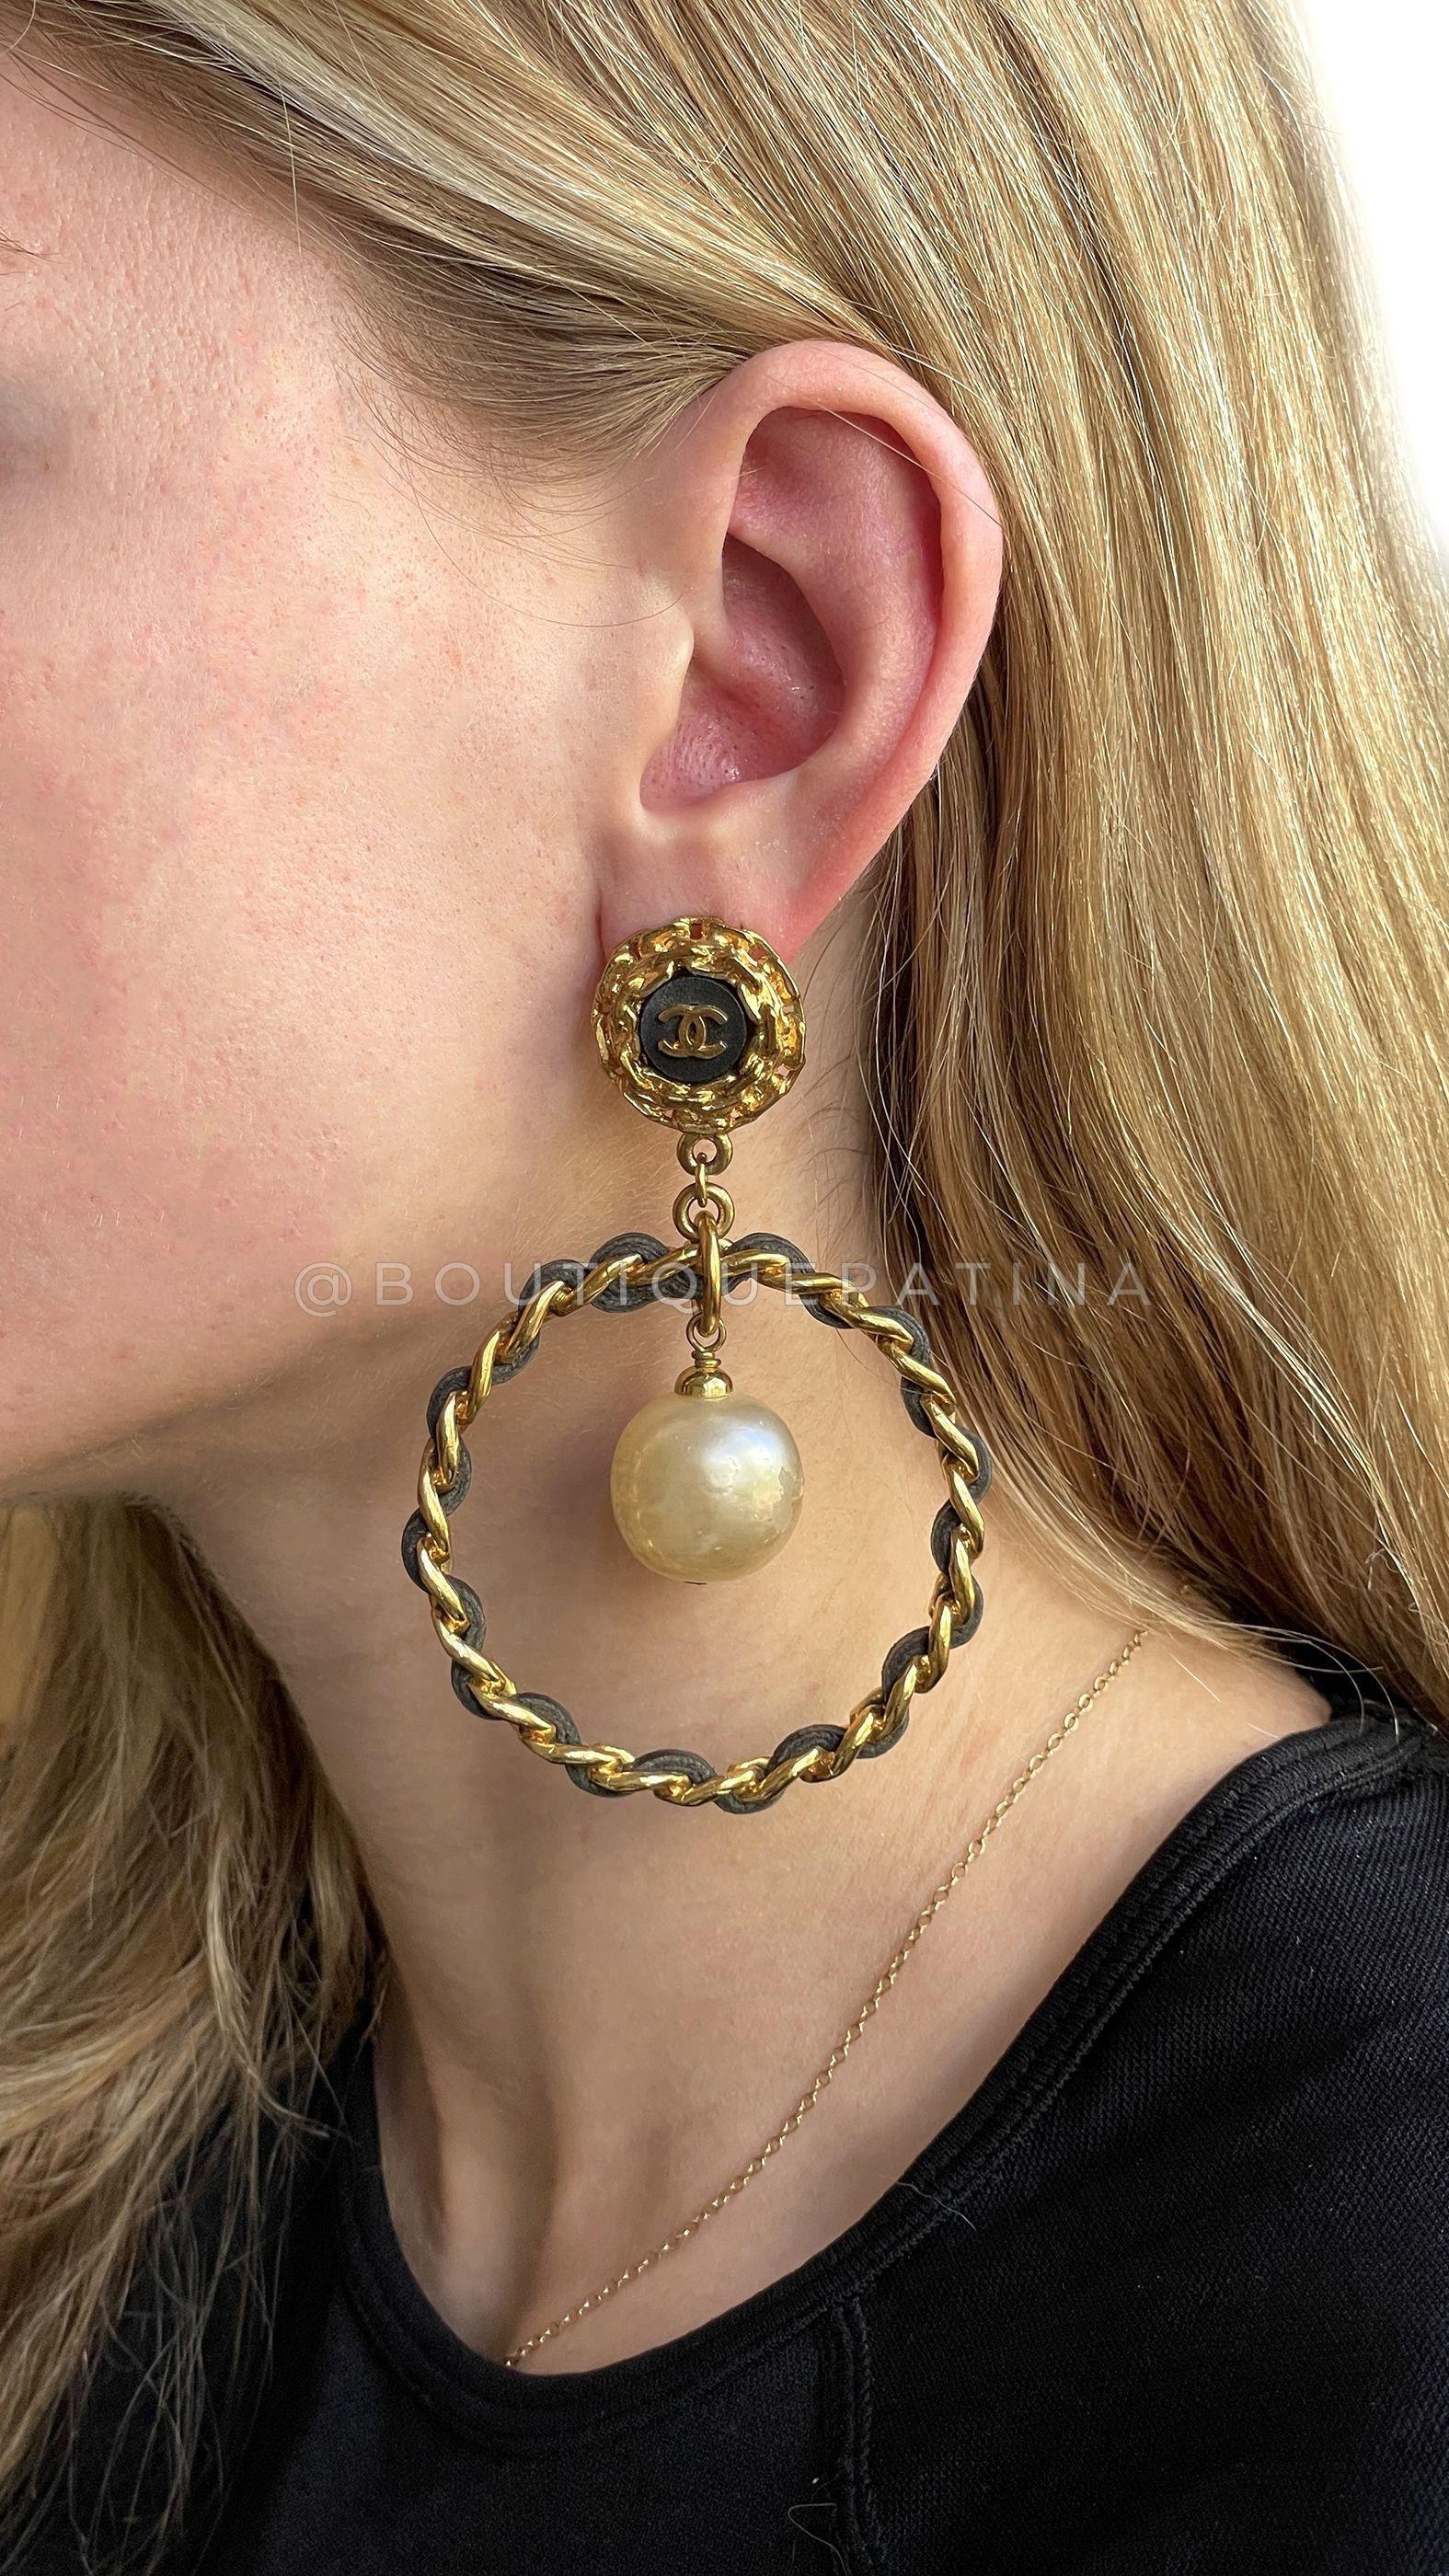 Chanel Vintage Woven Chain Collection 27 Pearl Drop Hoop Earrings 65928 In Excellent Condition For Sale In Costa Mesa, CA